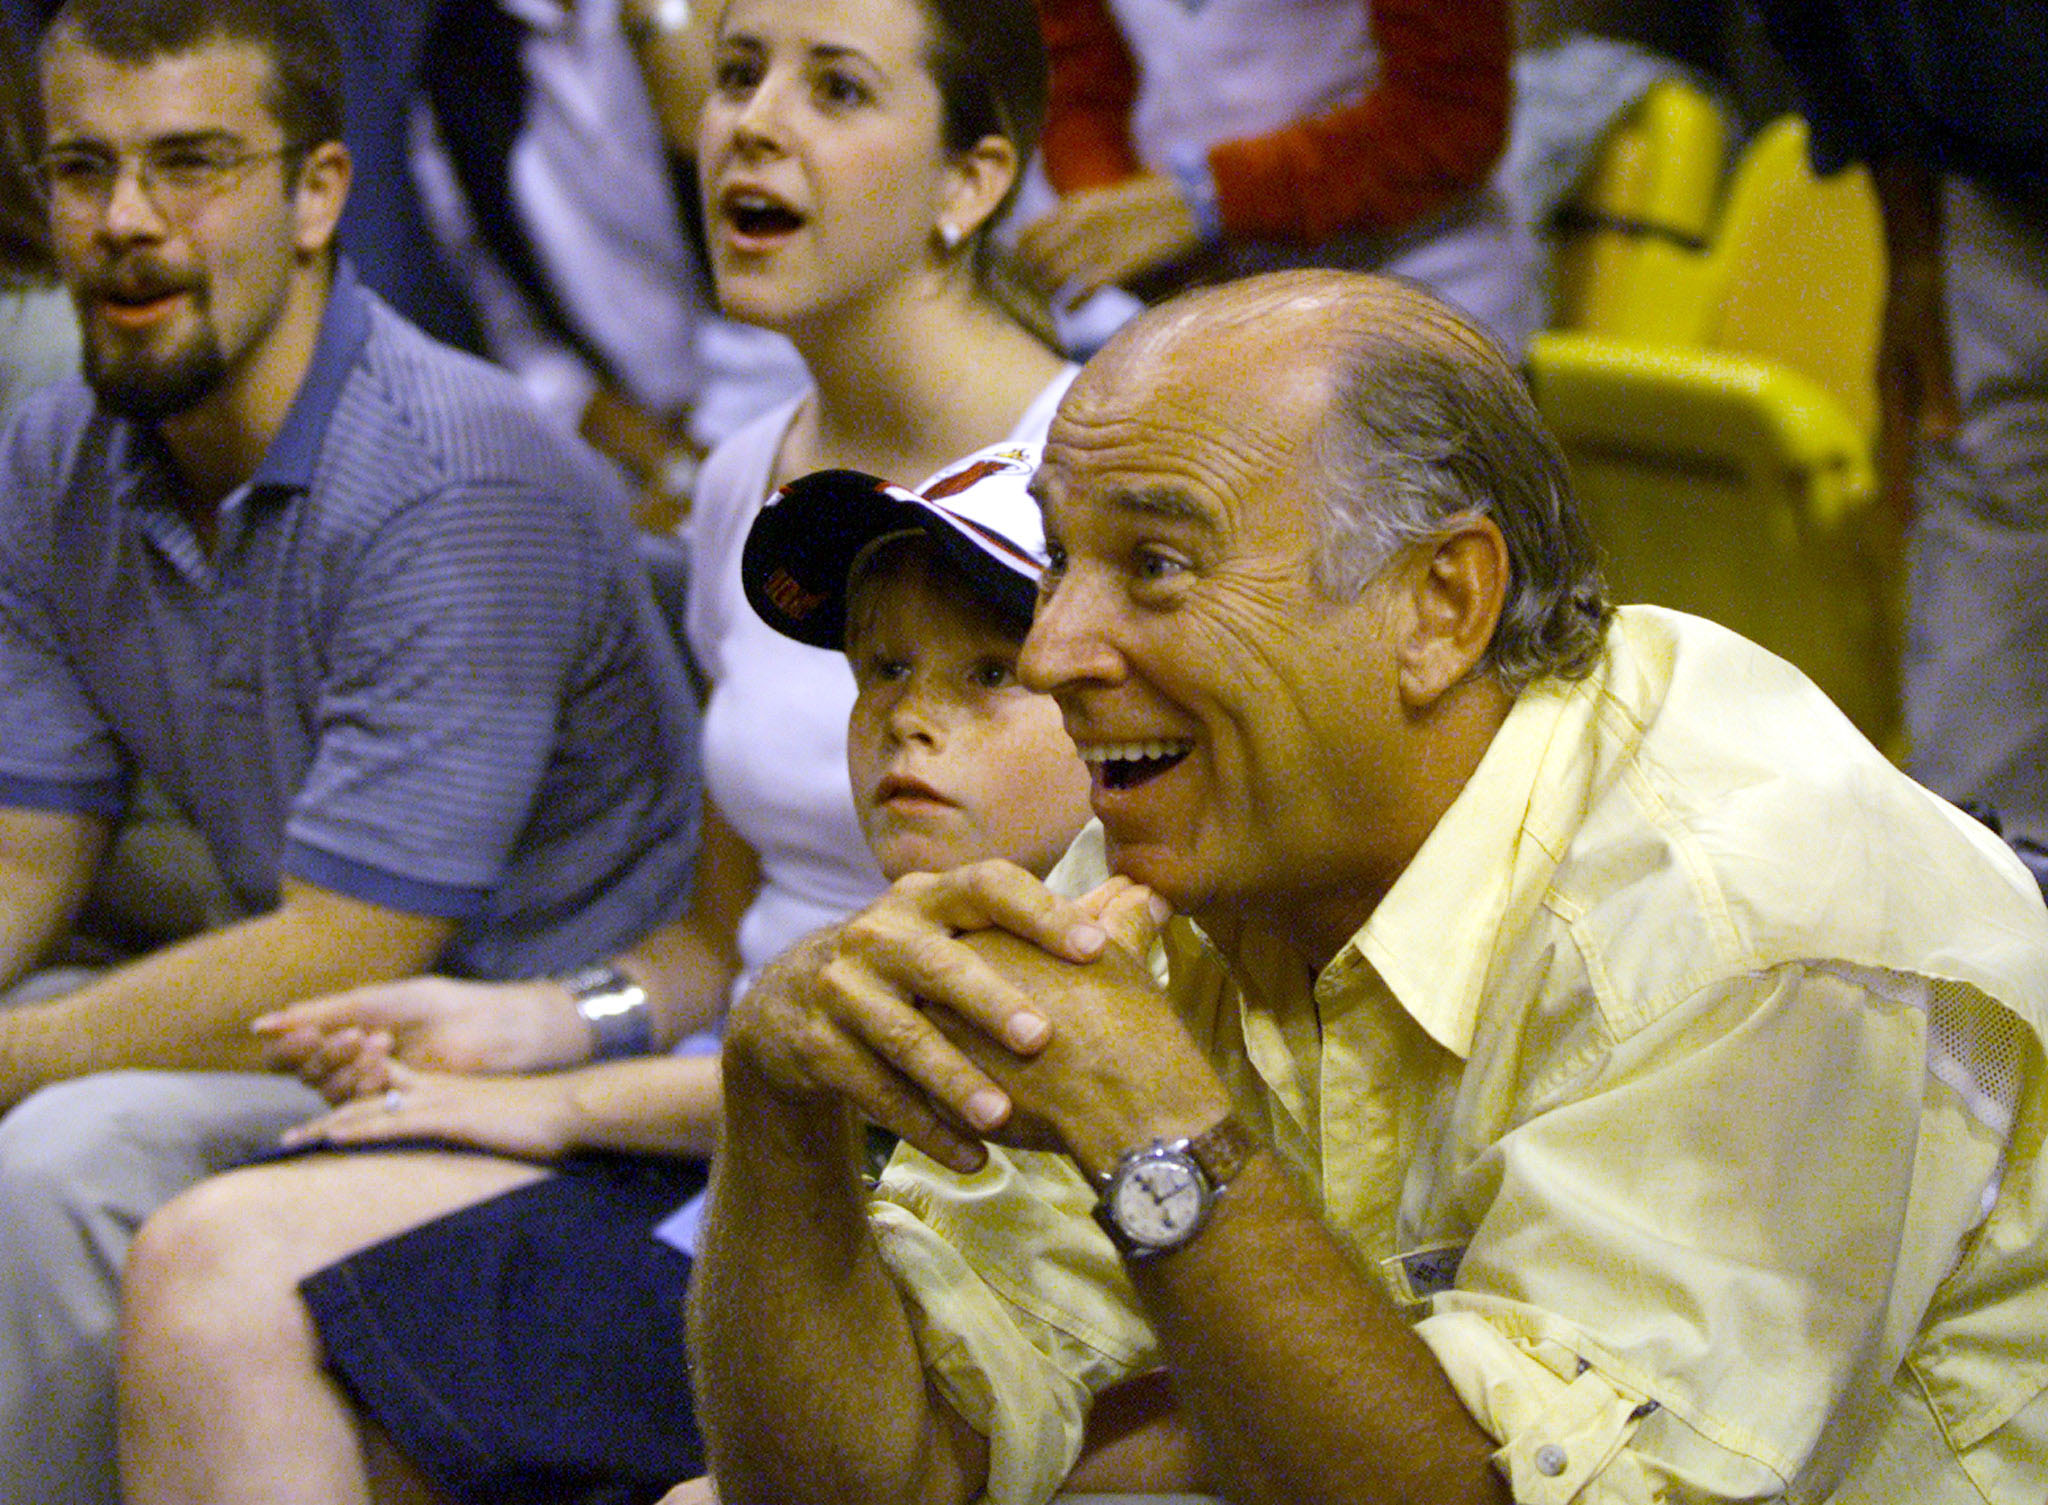 Singer Jimmy Buffet (R) with his six-year-old son Cameron, reacts to being told he's been thrown out from the Miami Heat versus the New York Knicks game February 4, 2001 at the American Airlines arena in Miami. | Source: Getty Images